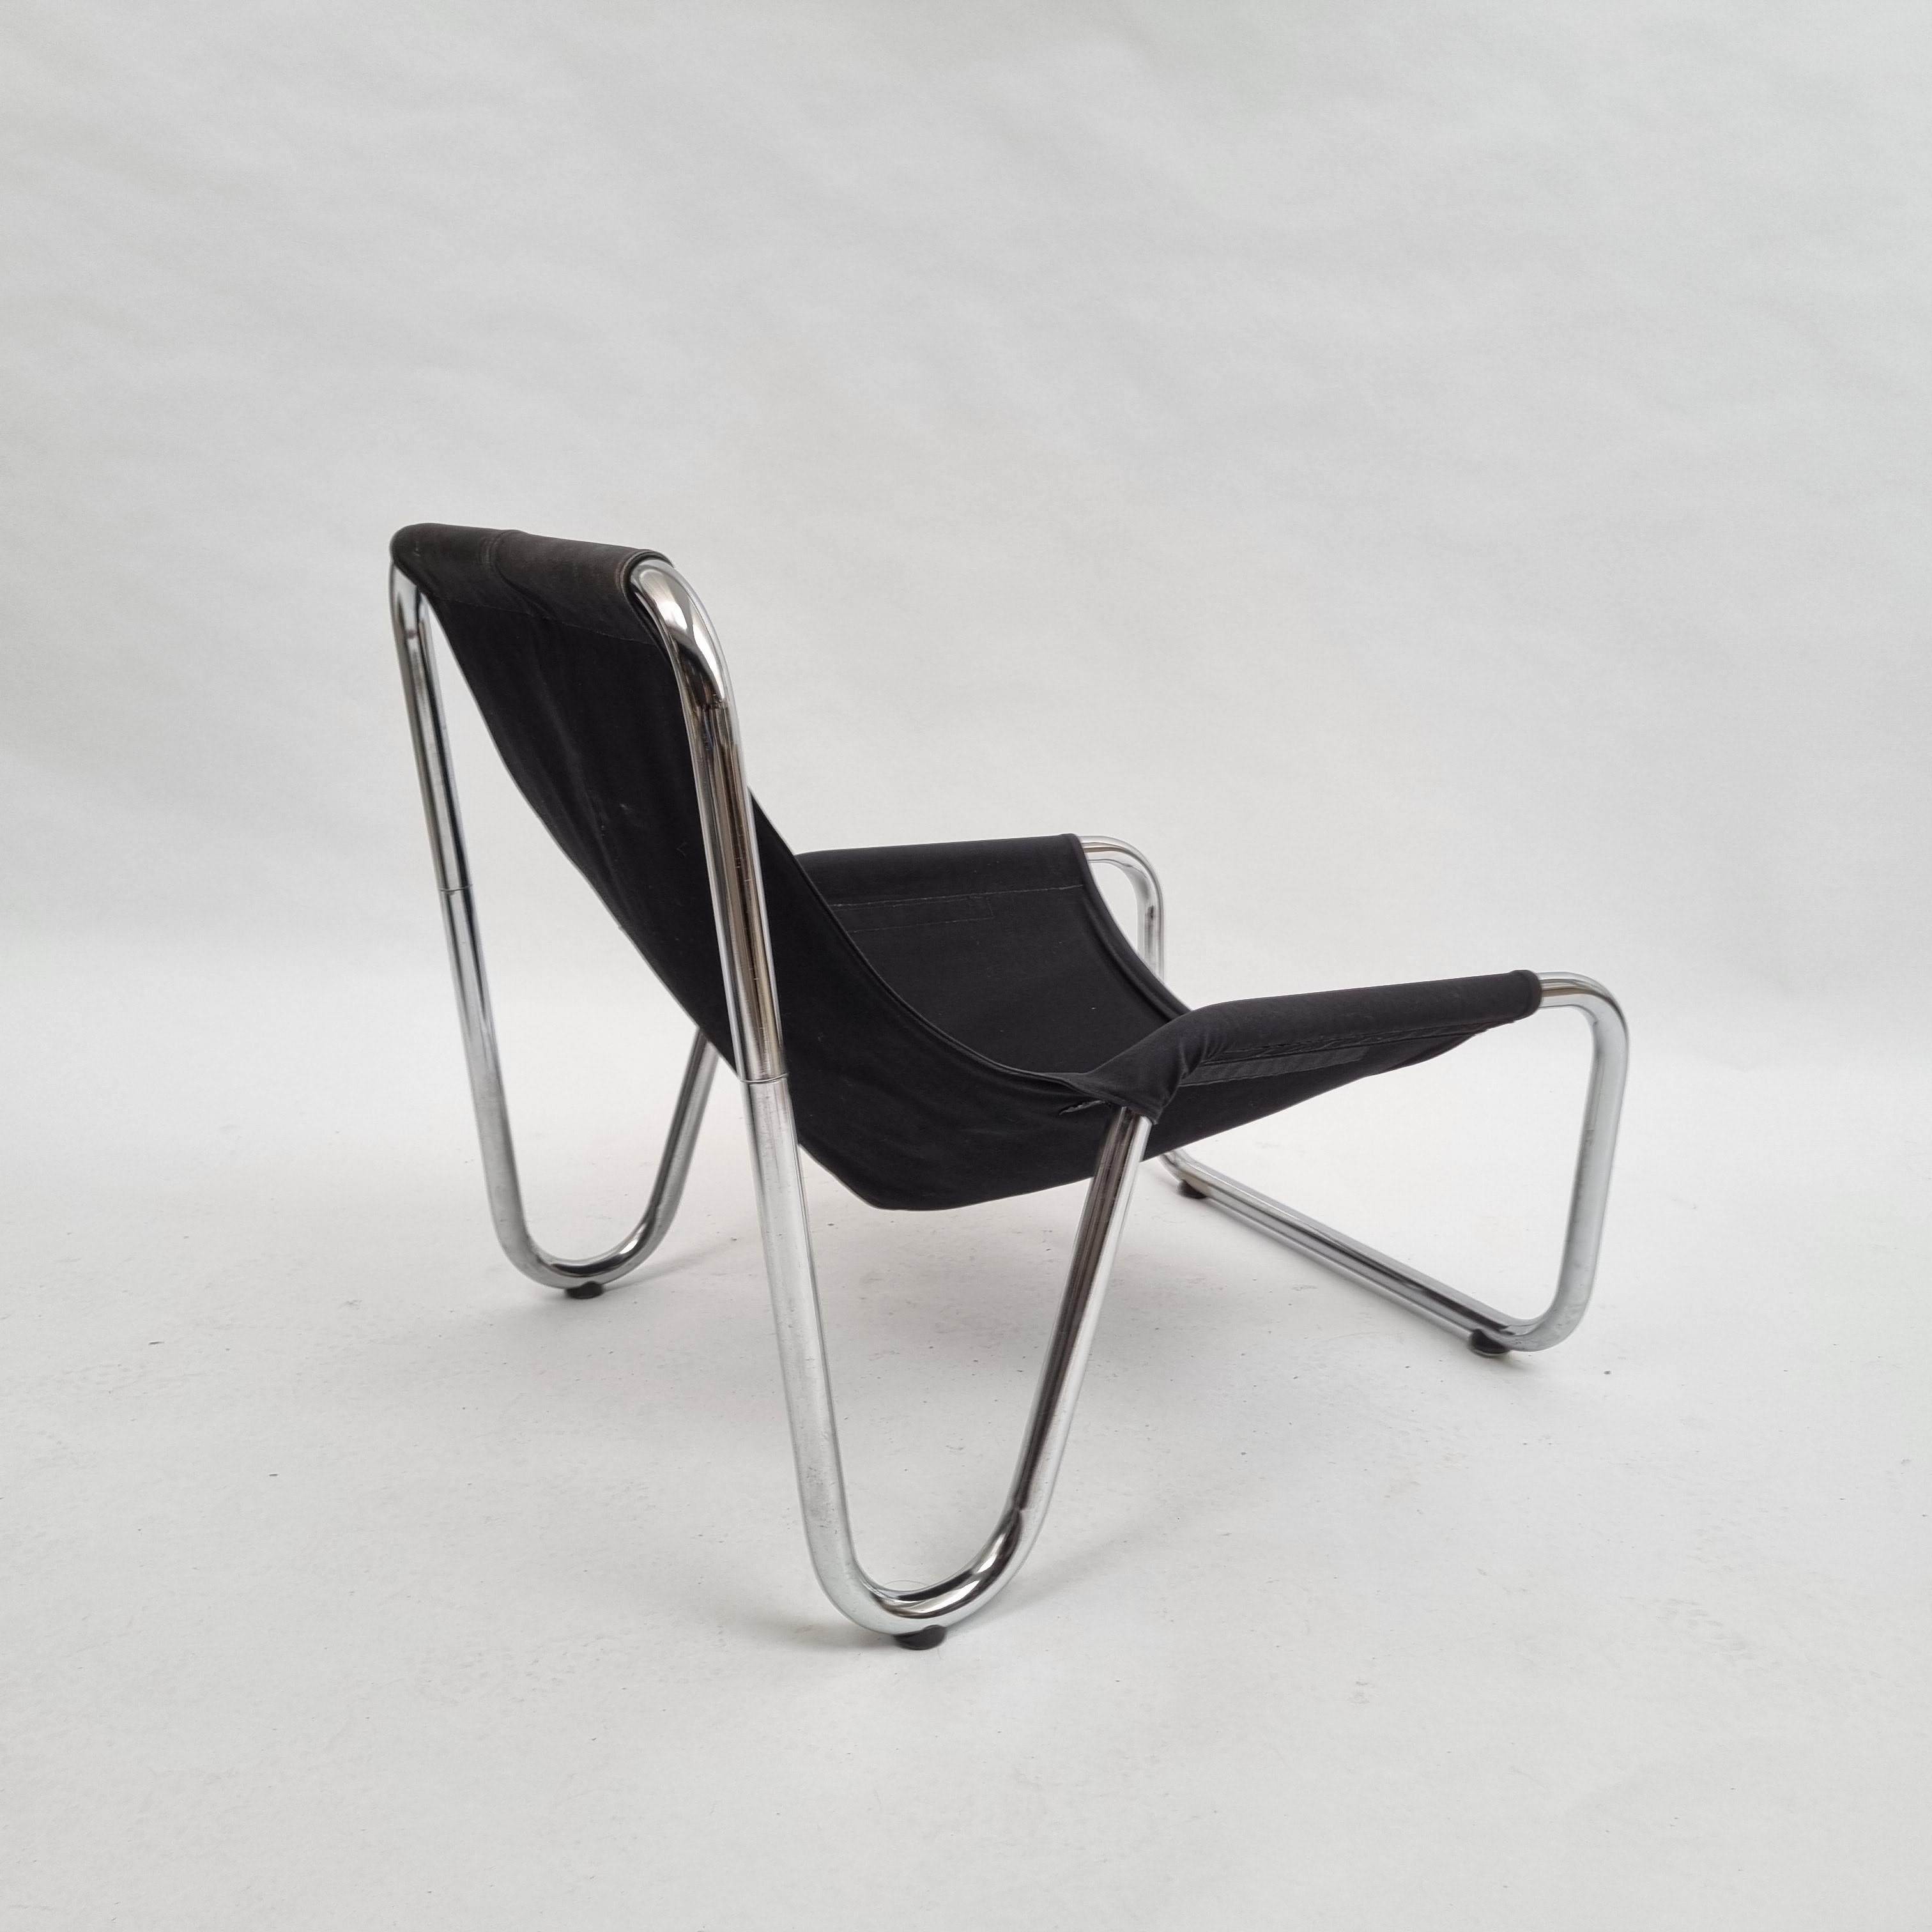 Late 20th Century Danish Black Leather Lounge Chair, 1970s